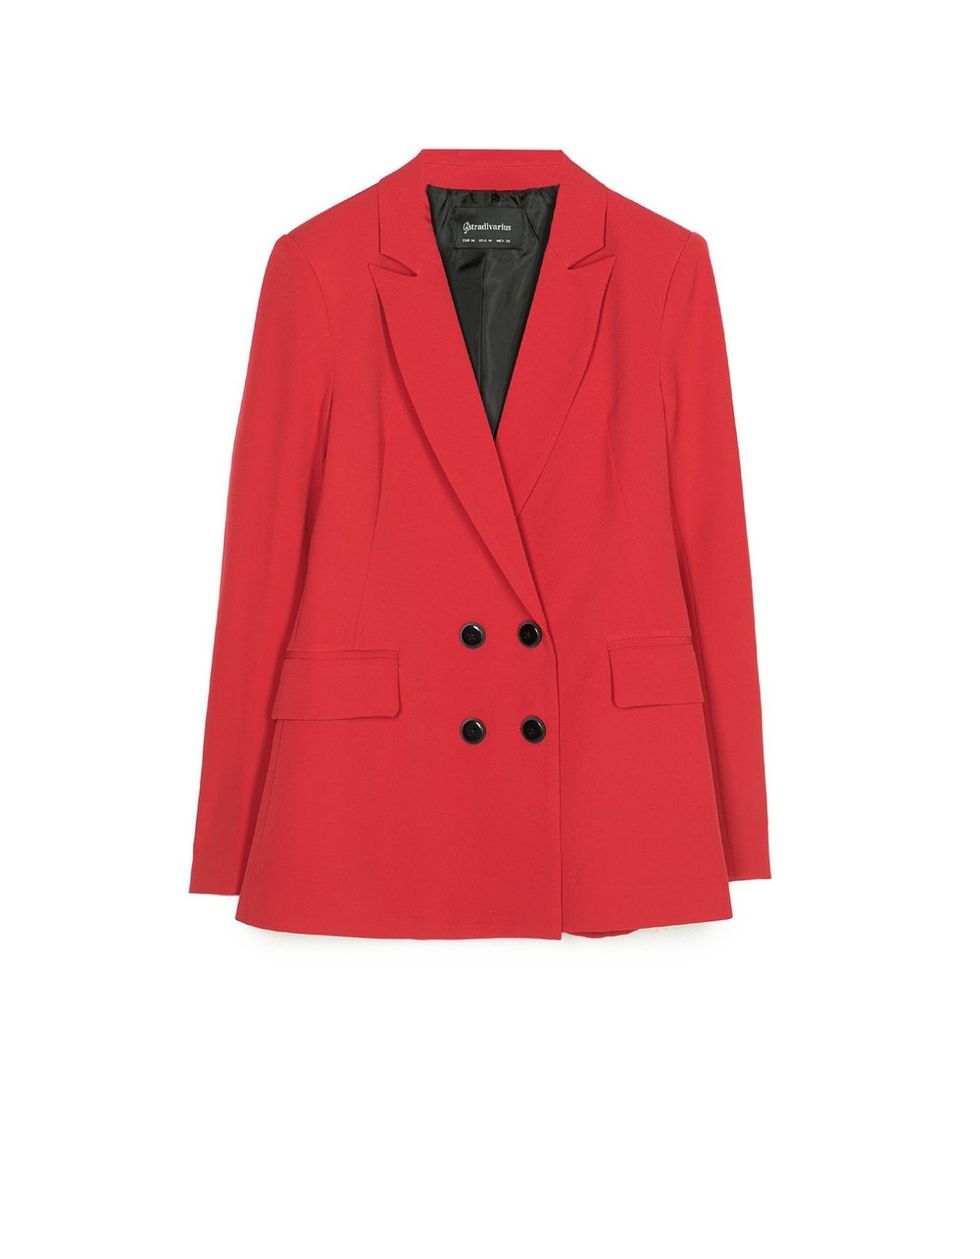 Clothing, Outerwear, Blazer, Jacket, Red, Sleeve, Suit, Button, Formal wear, Coat, 